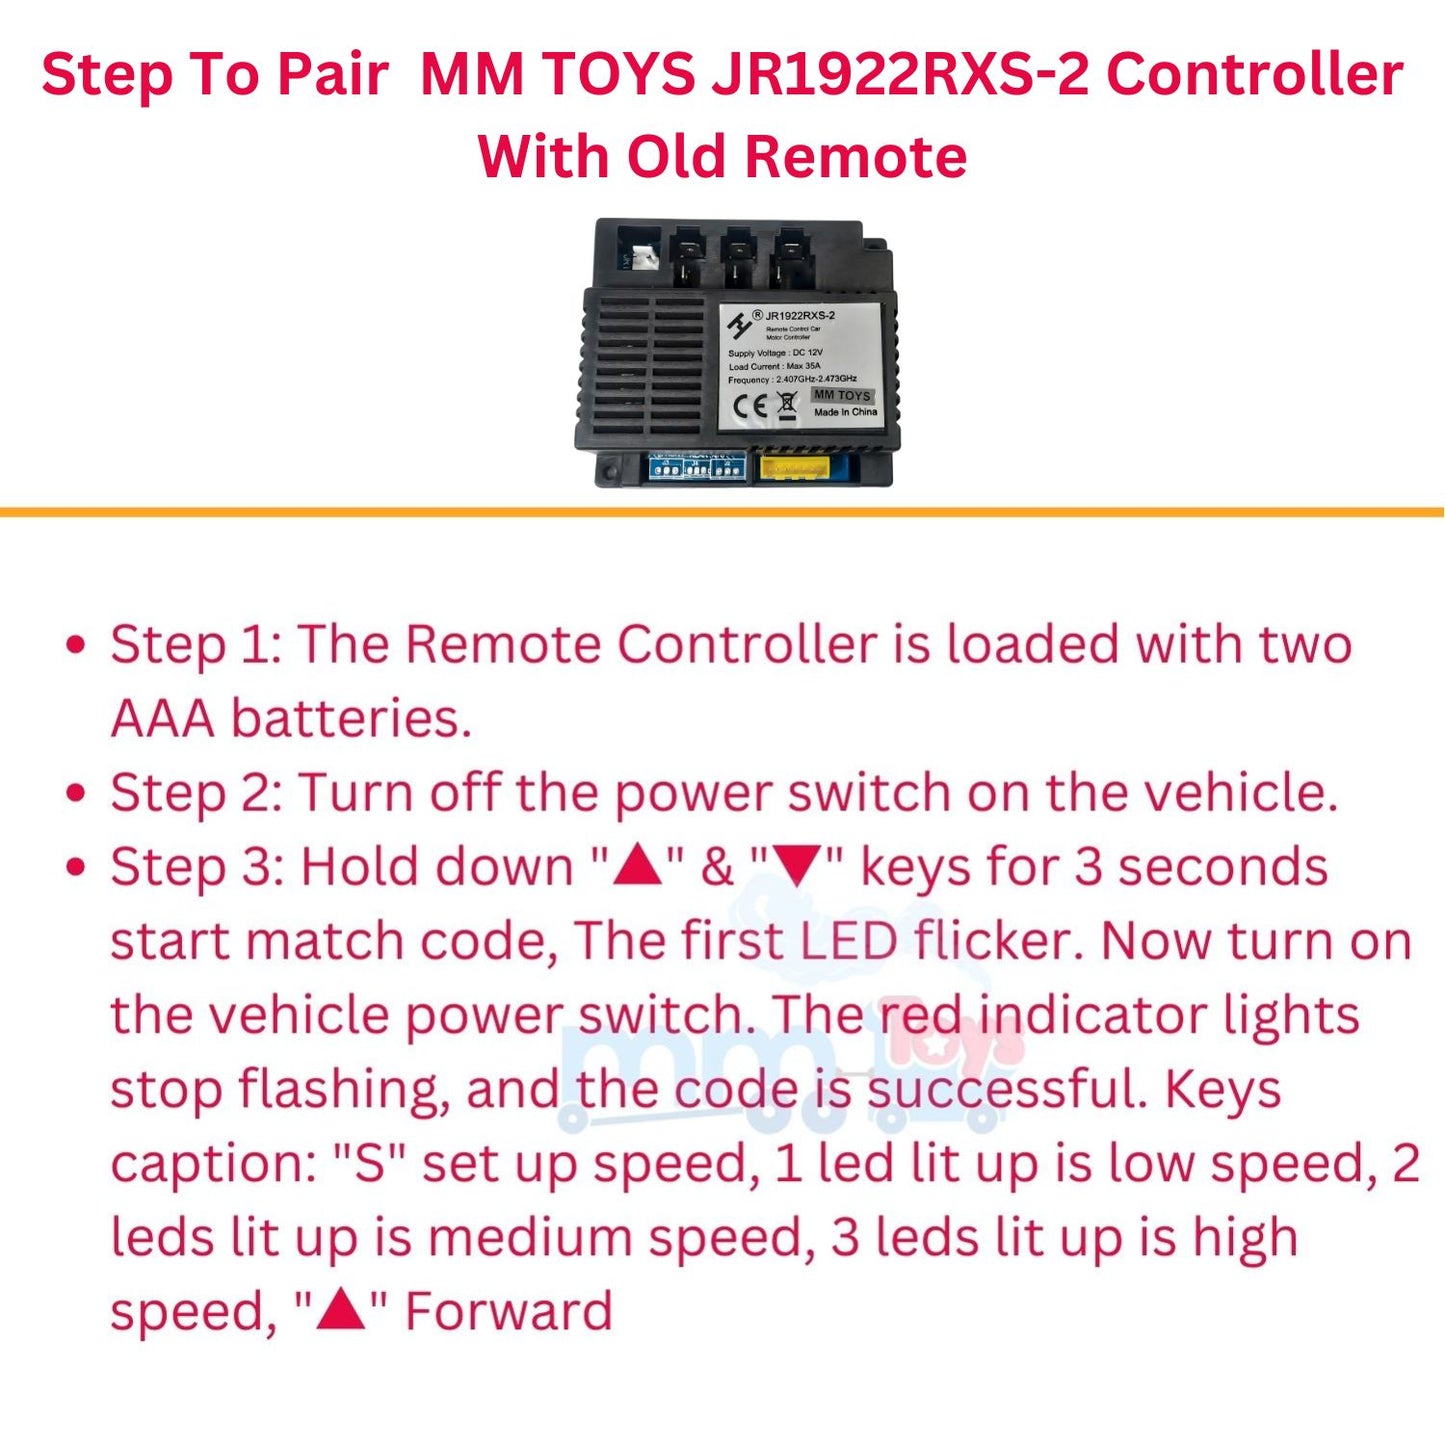 MM TOYS MotorMaster 12V Motor Reciever Controller JR 1922RXS-2, 35A Load, 2.407-2.473 GHz, Easy Install, Replacement Part for Kids Electric Car/Jeep/Bike - Black